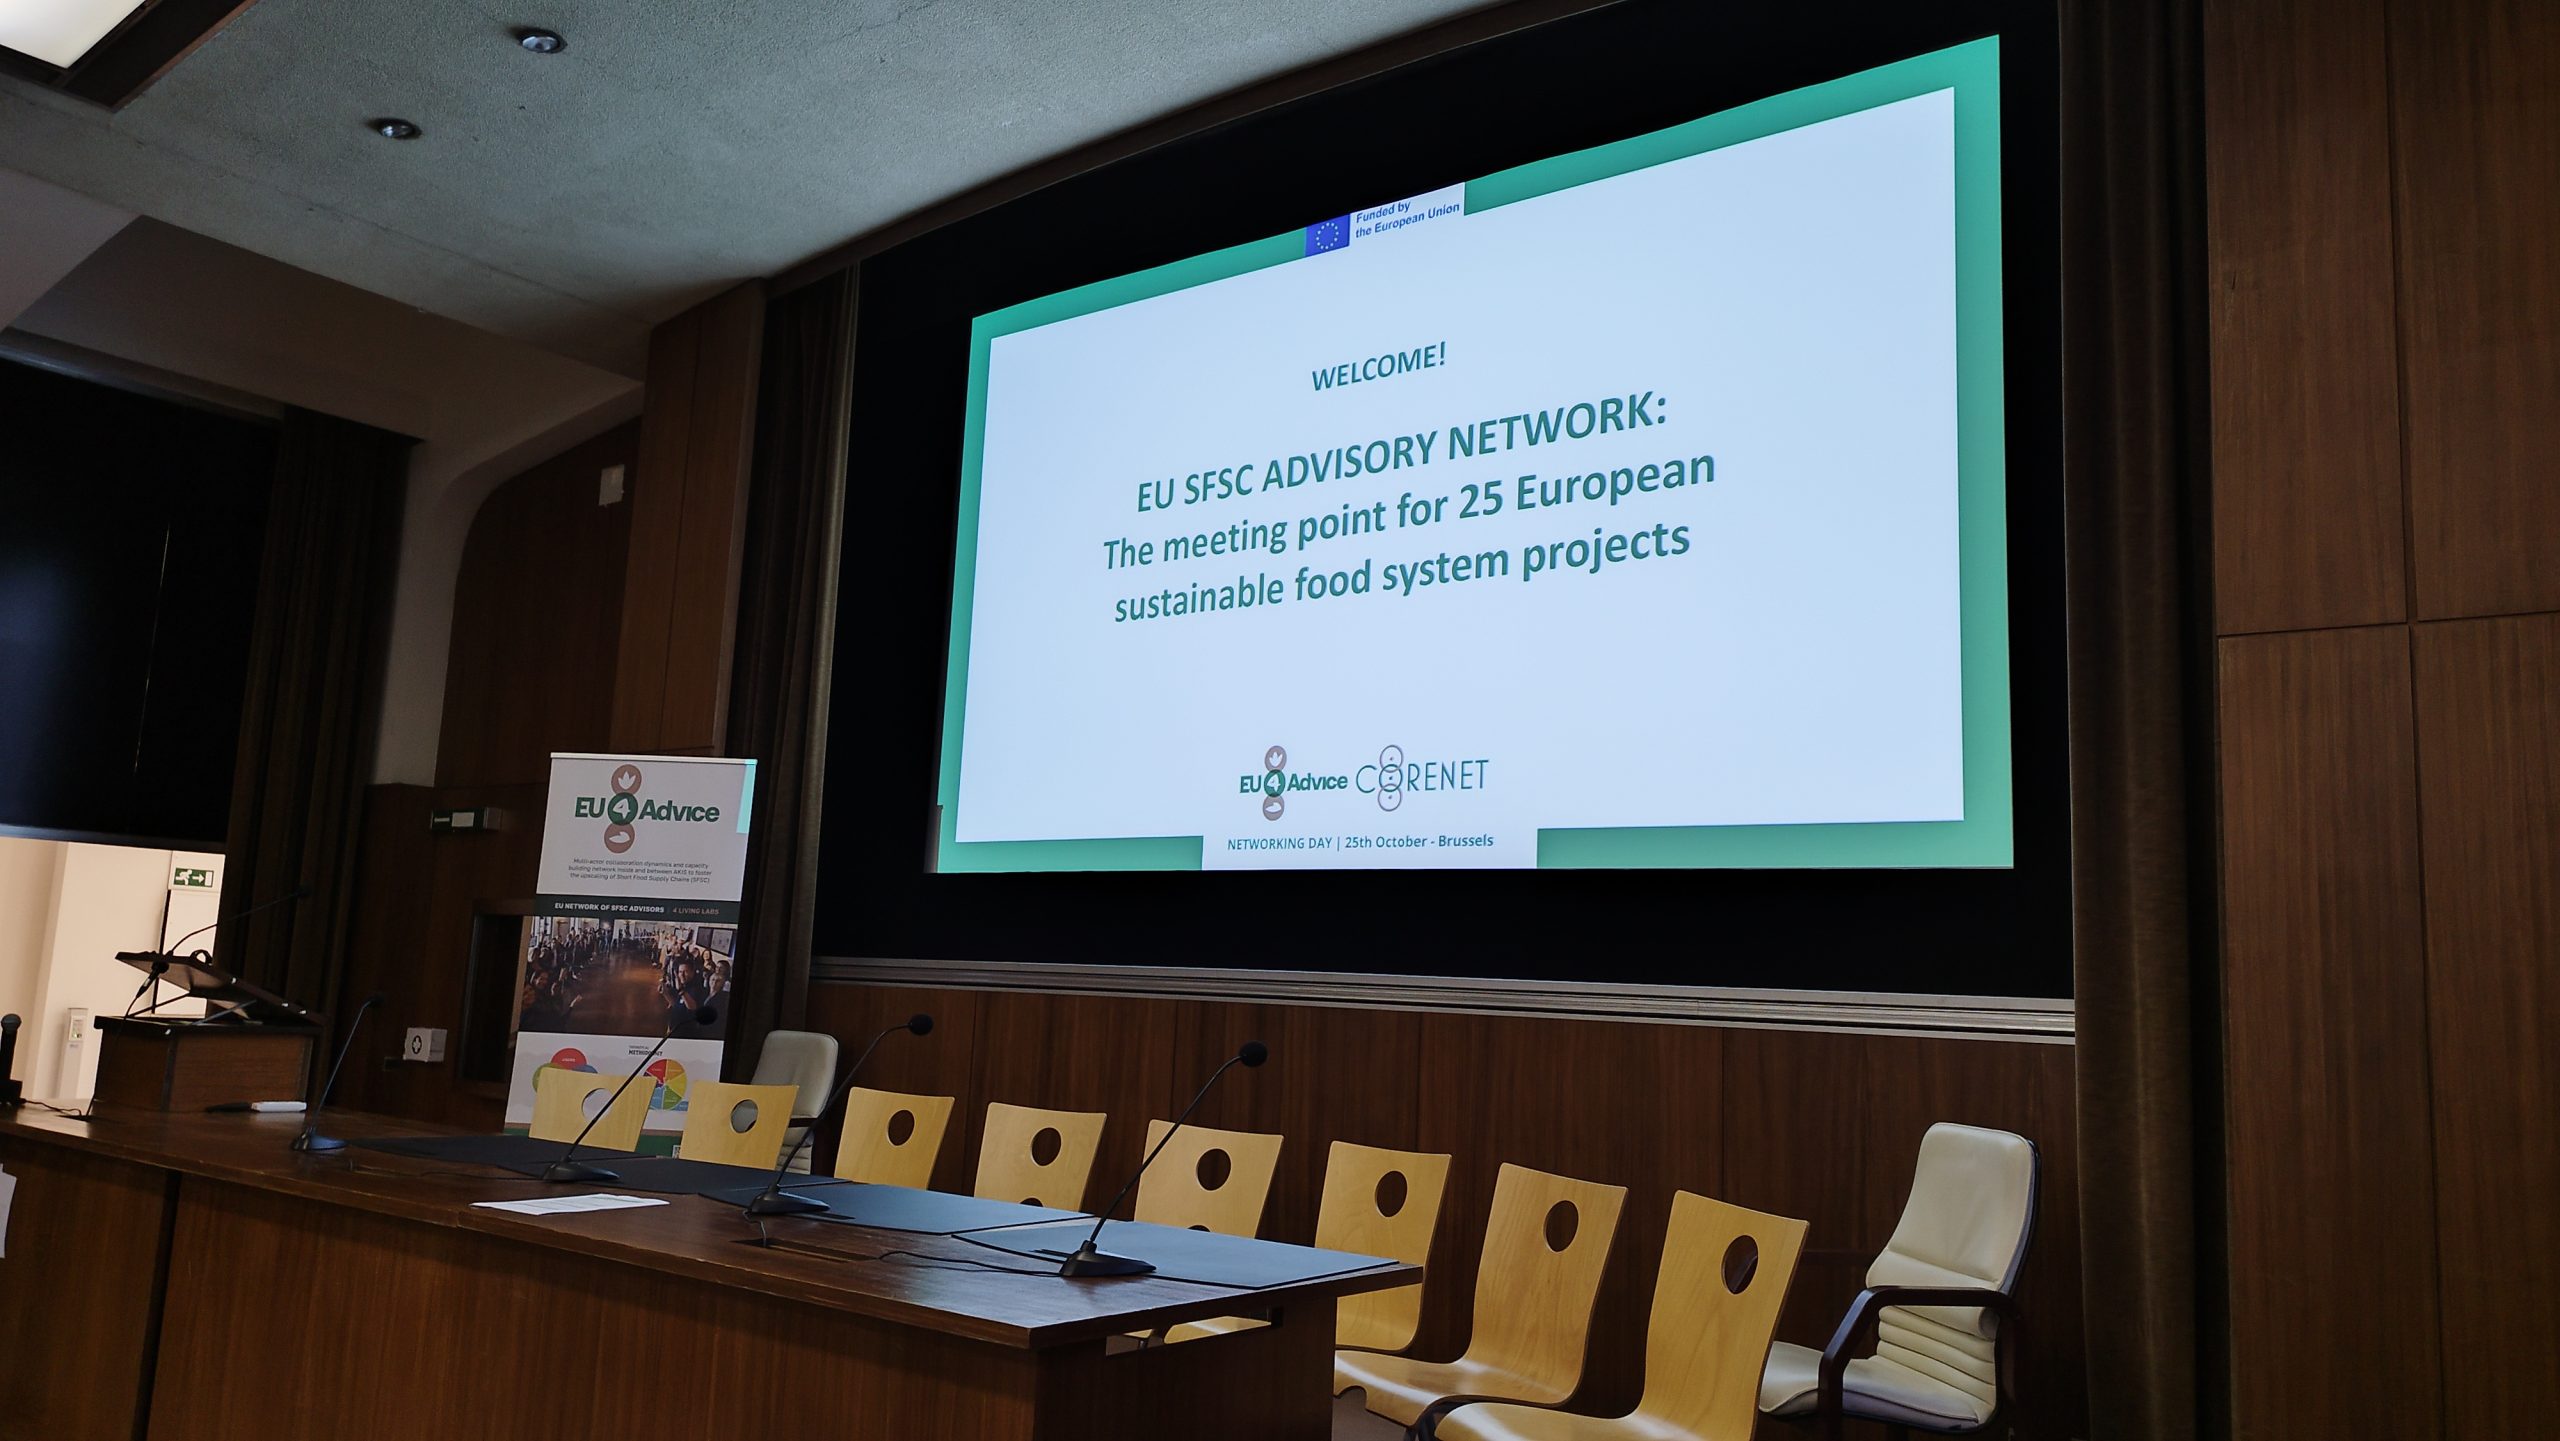 NETWORKING EVENT – 25 EUROPEAN SUSTAINABLE FOOD PROJECTS COME TOGETHER